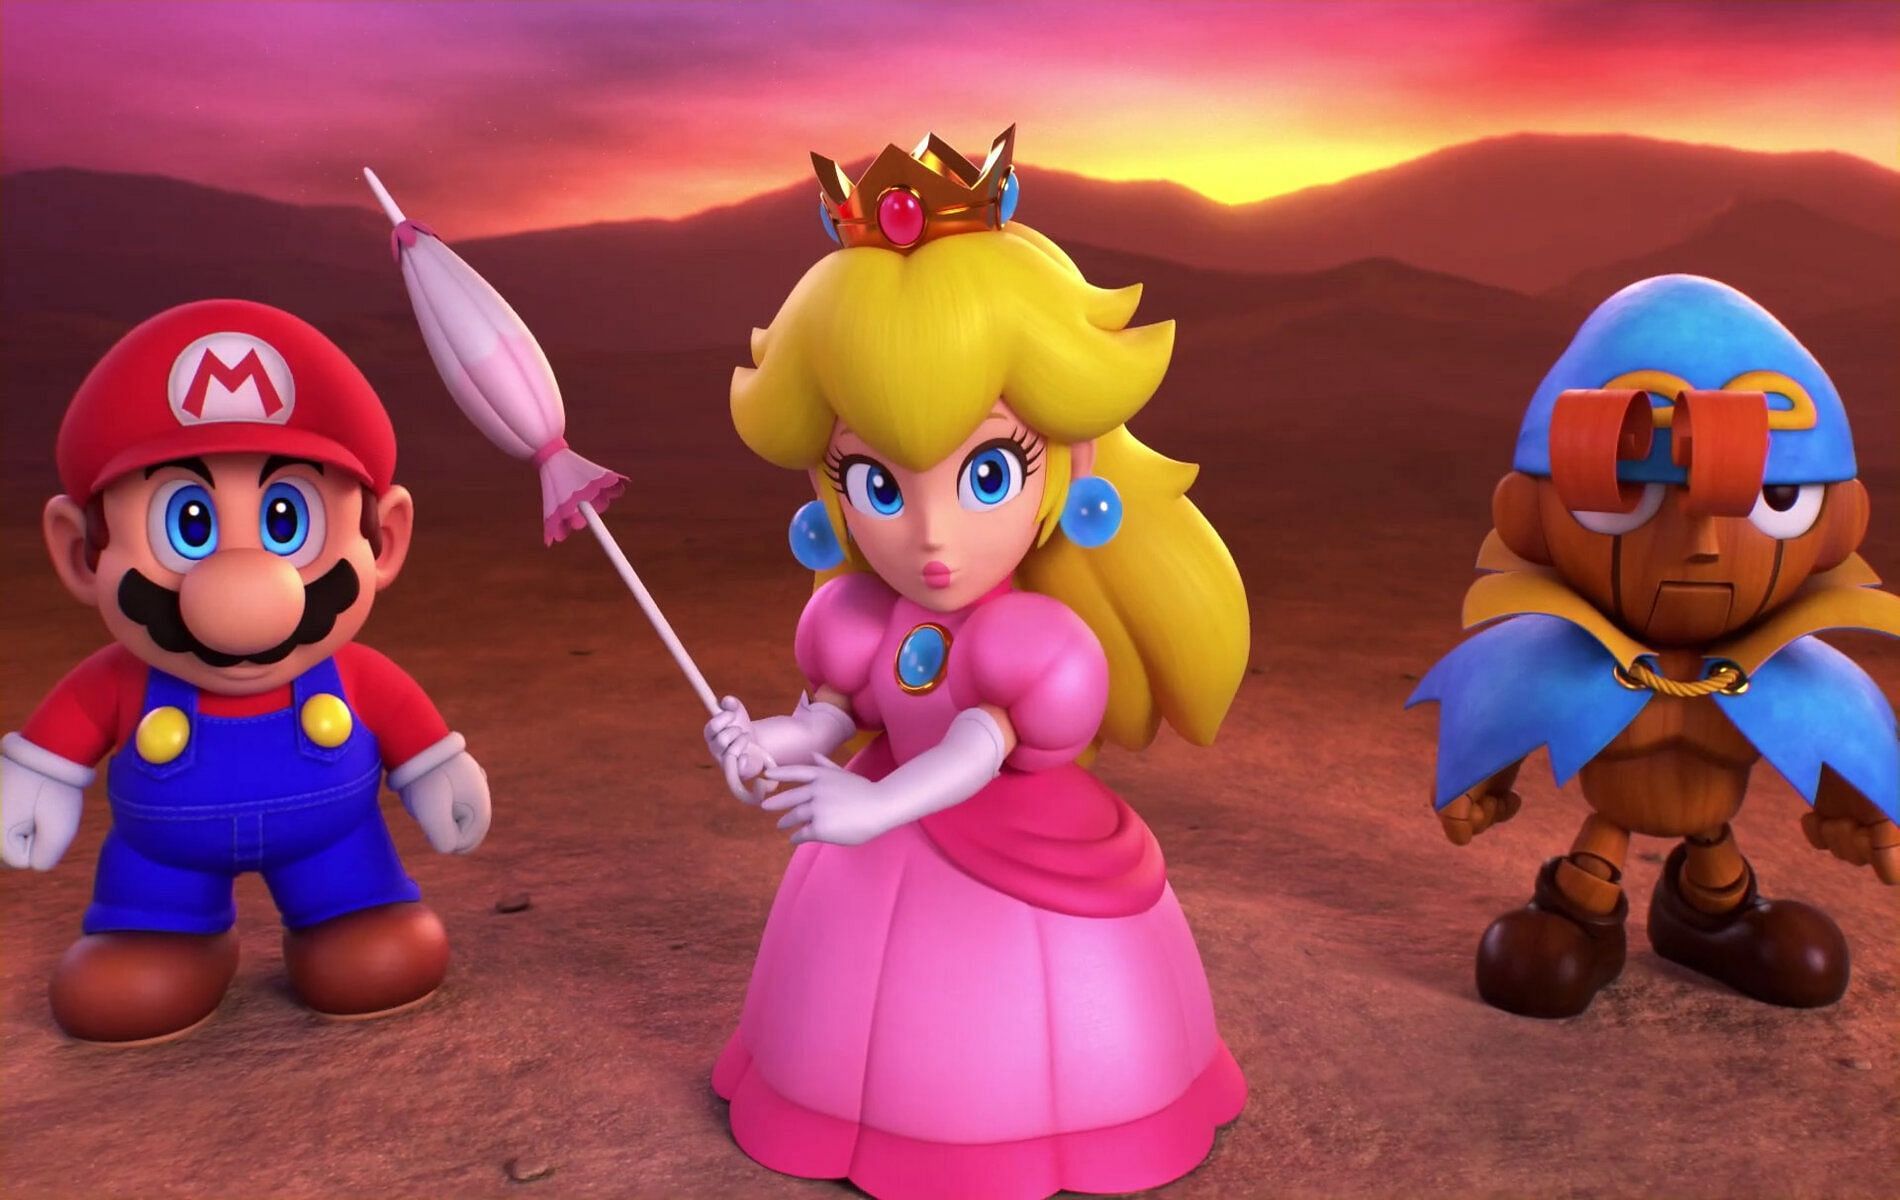 Screenshot from the recent Super Mario RPG remake